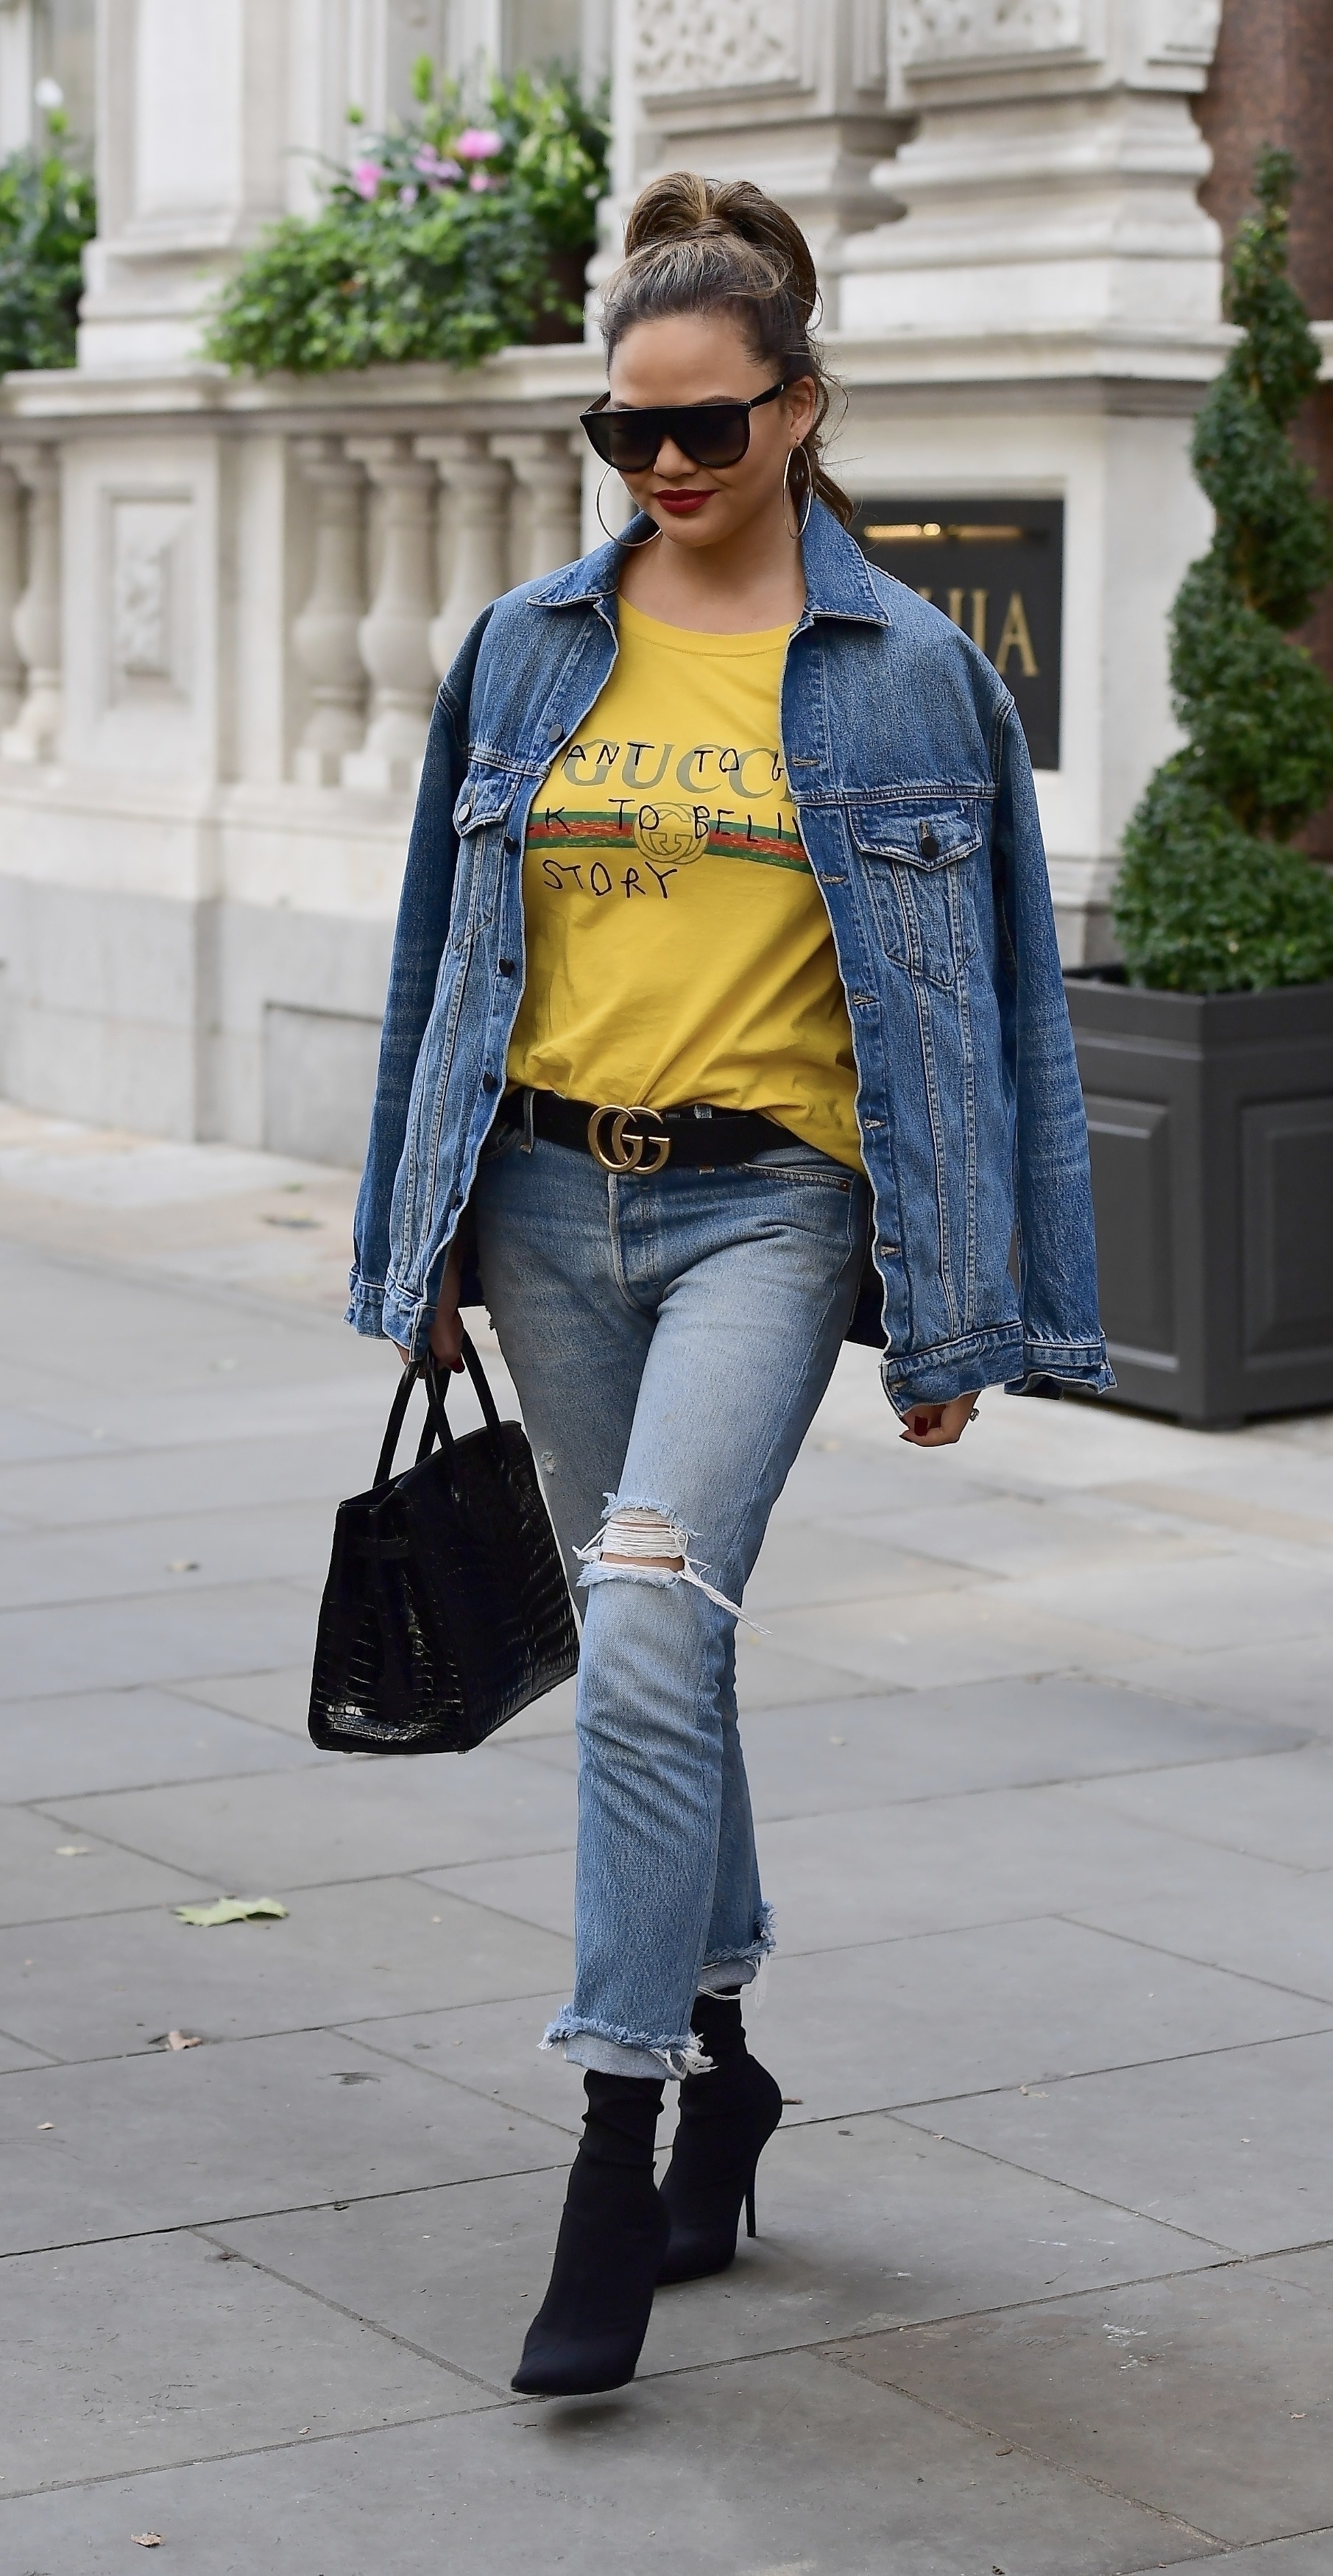 Wear Ankle Booties With Jeans 